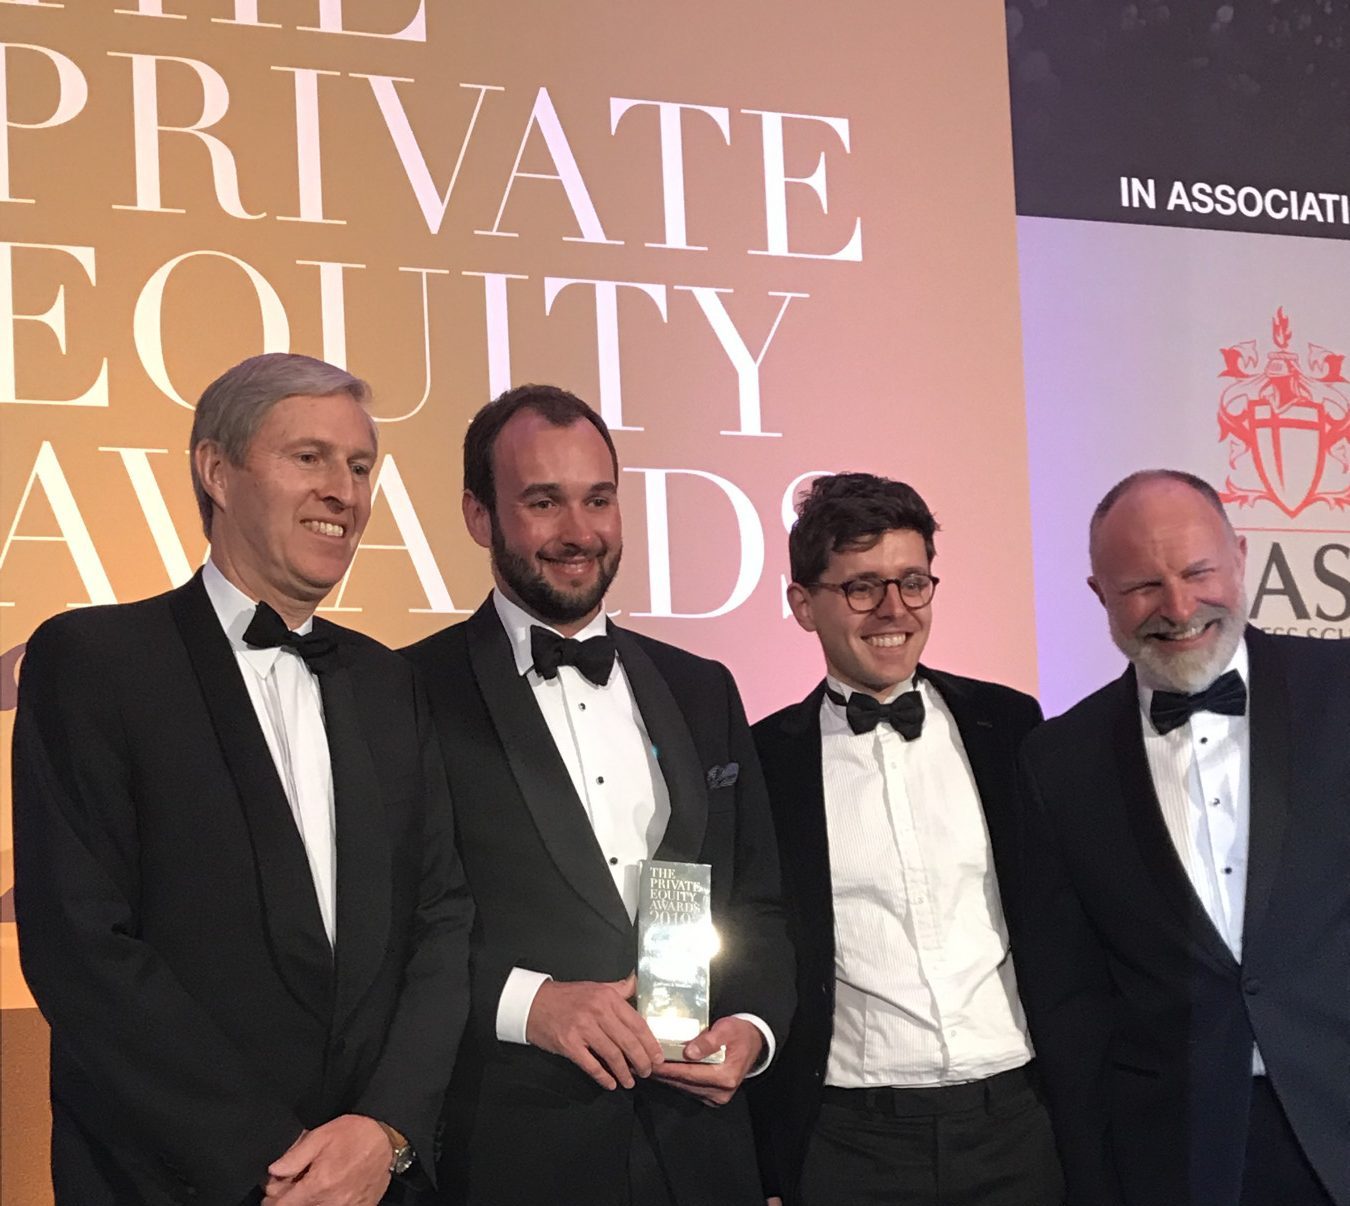 Real Deals Private Equity Awards 2019